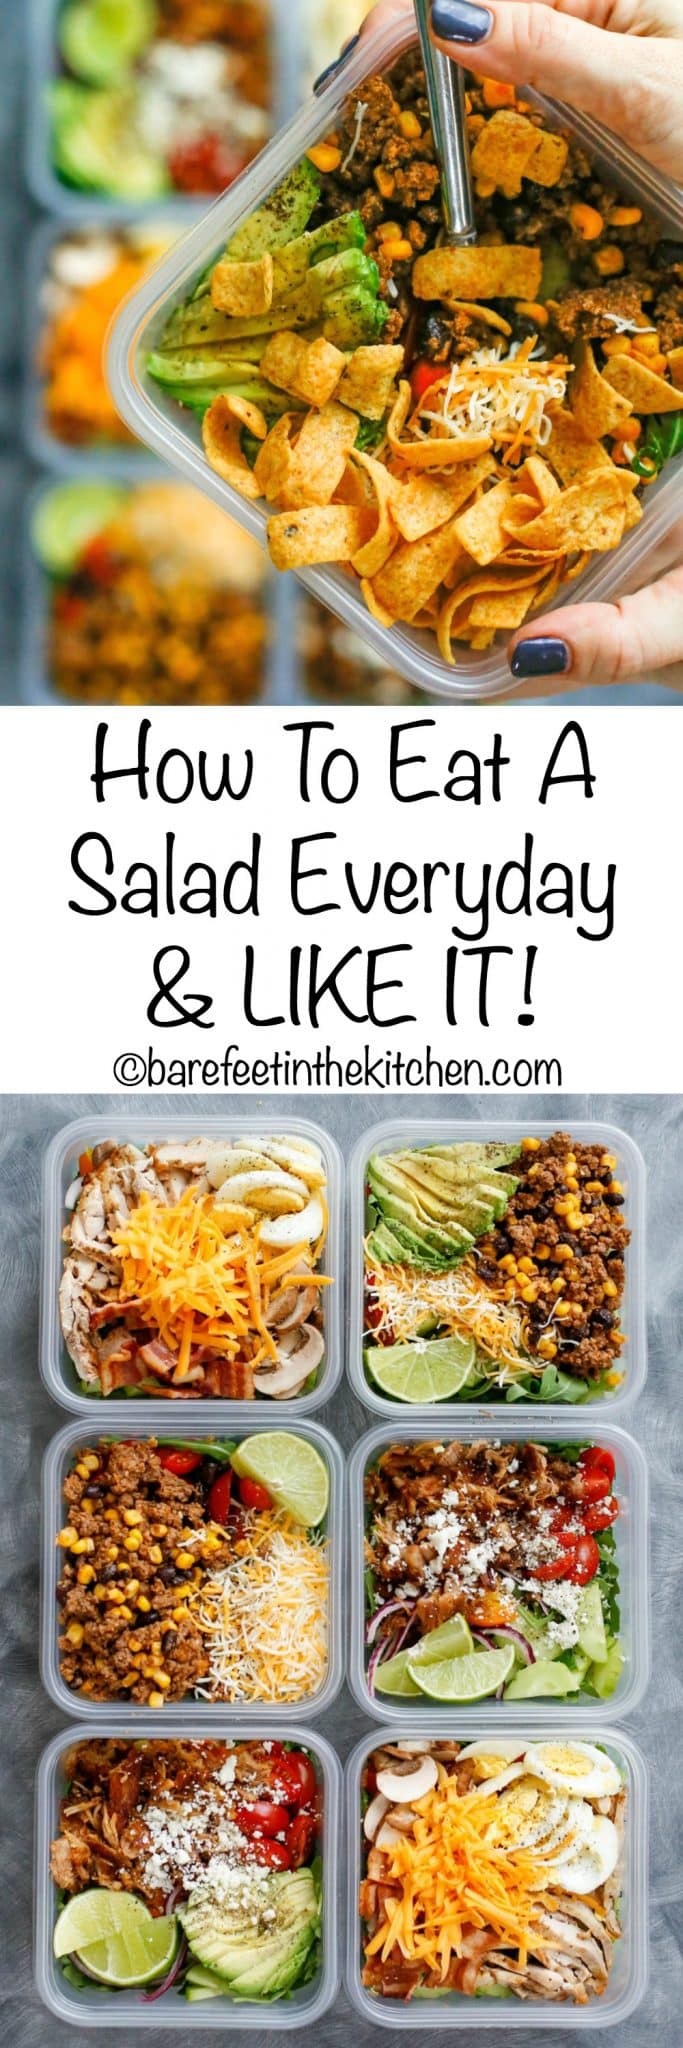 All the Salad Meal Prep tips! 